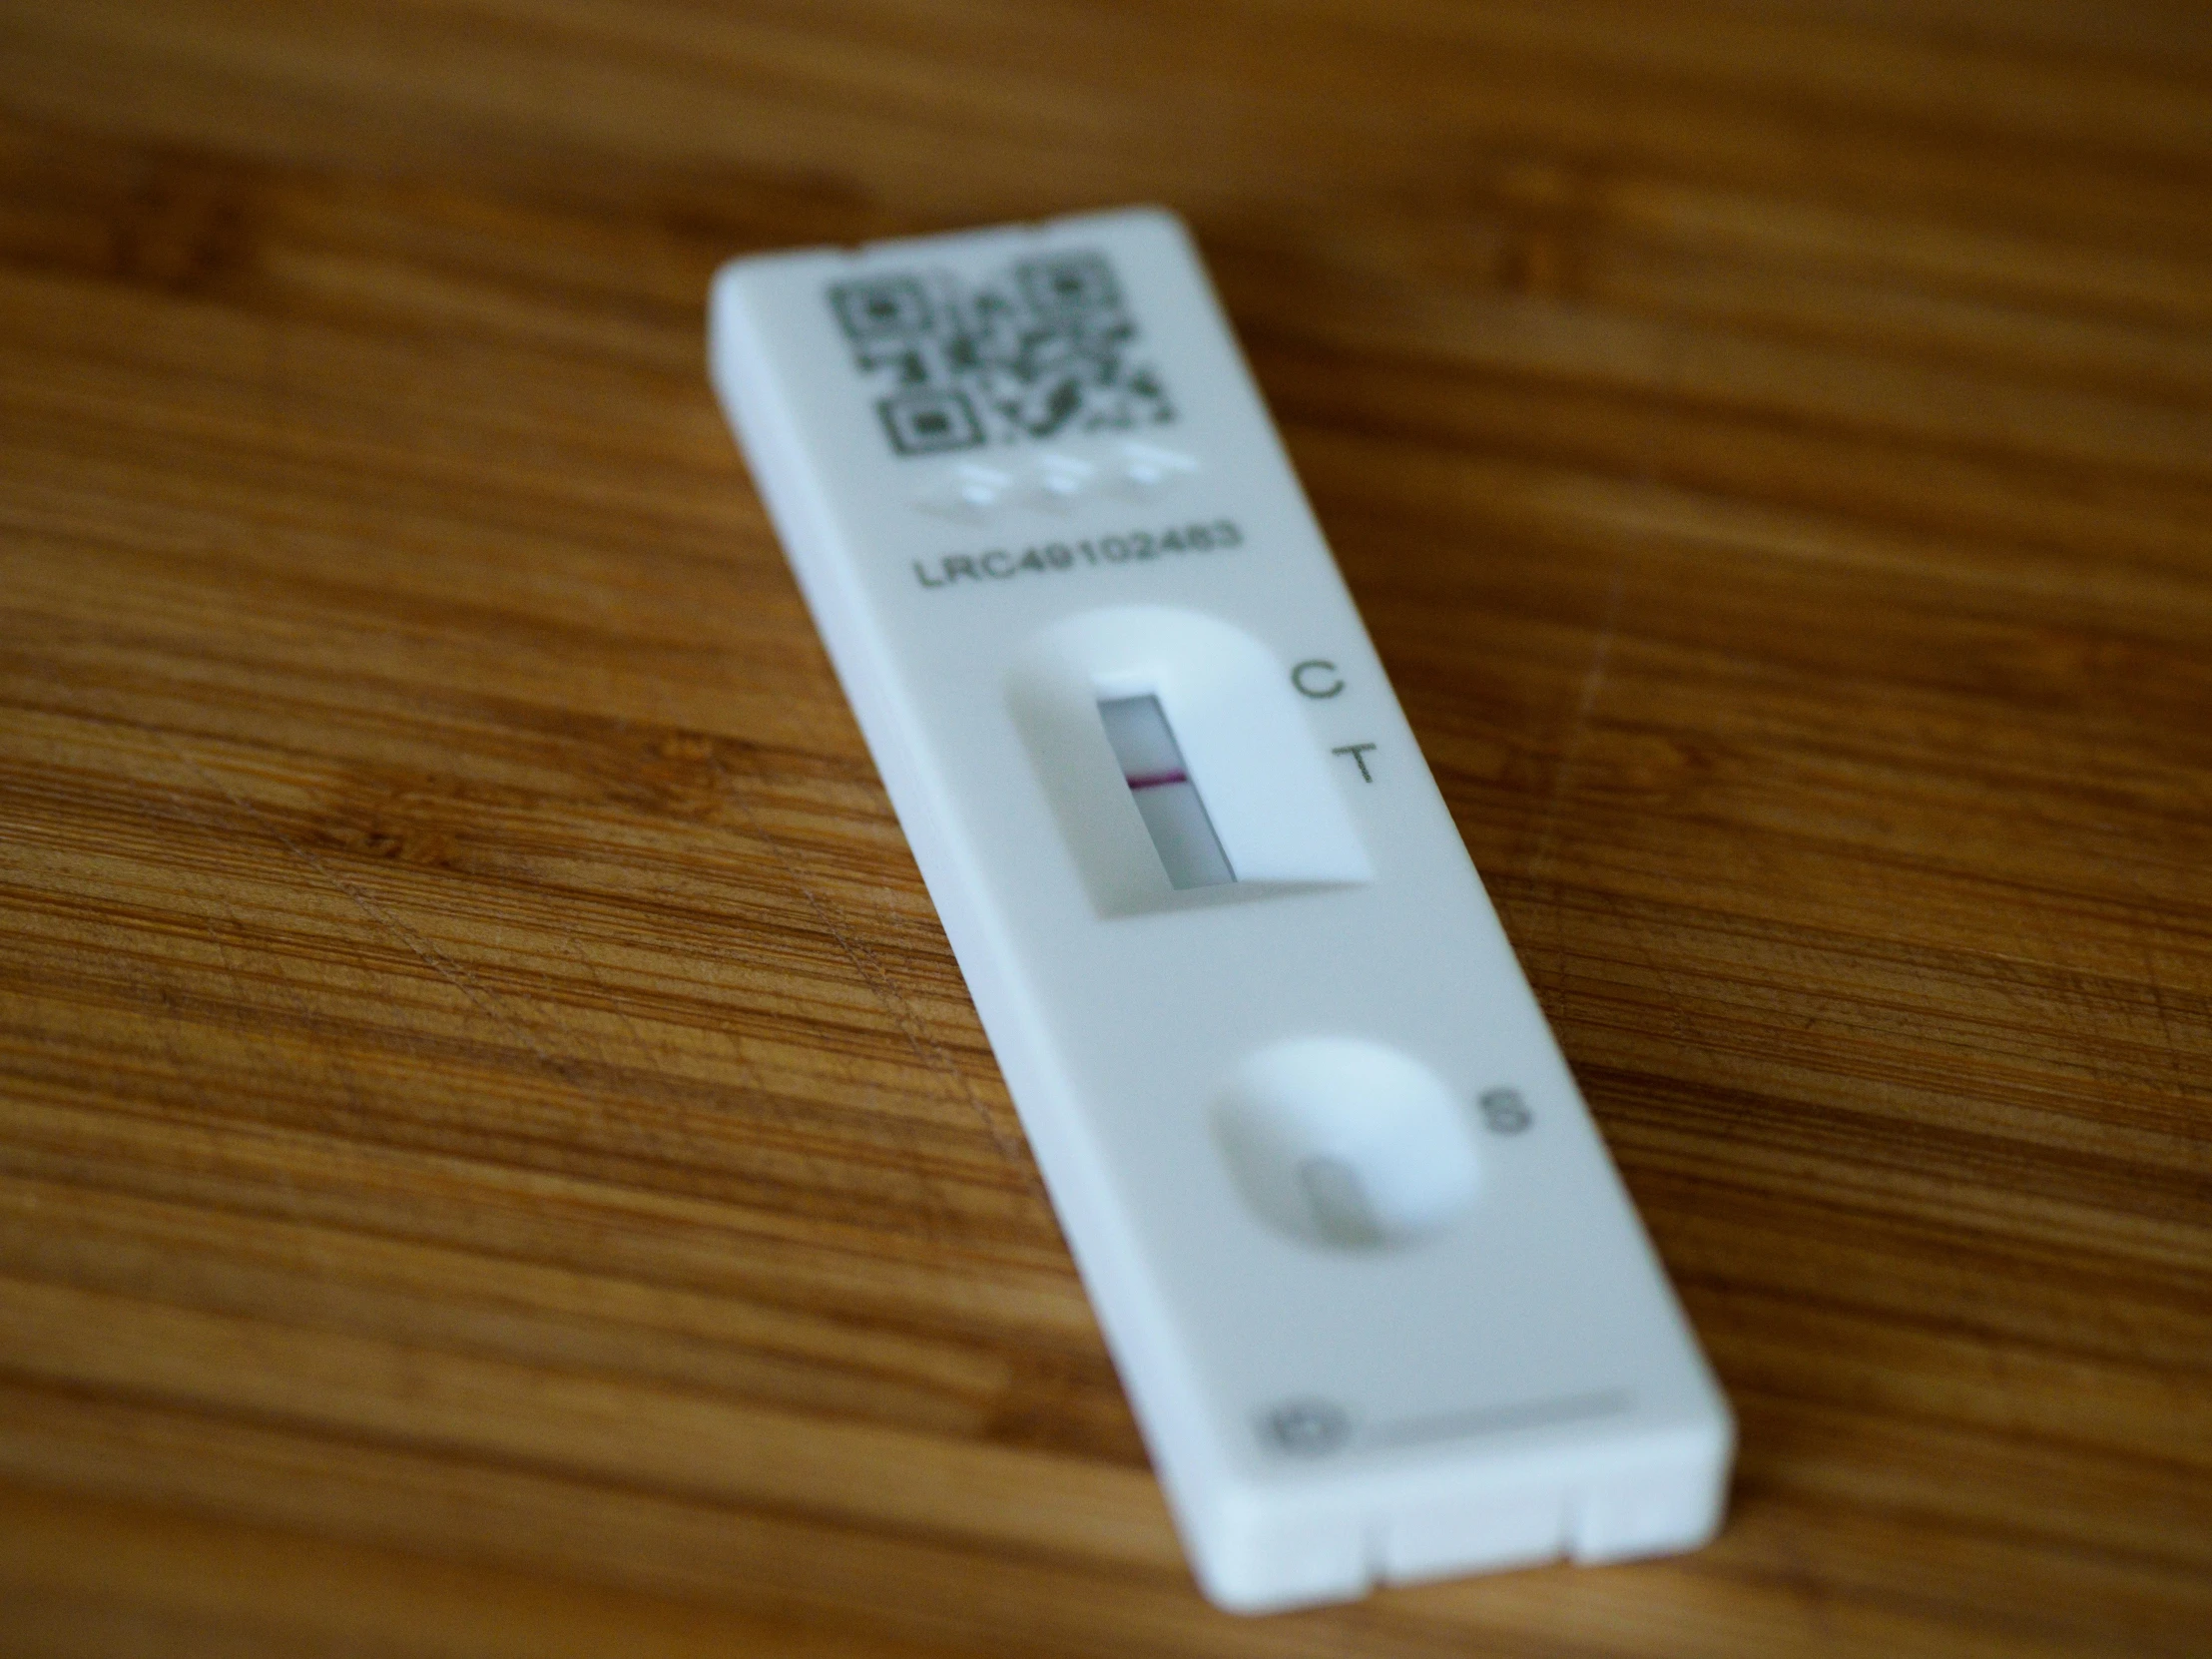 a wii remote control lying on a wooden surface